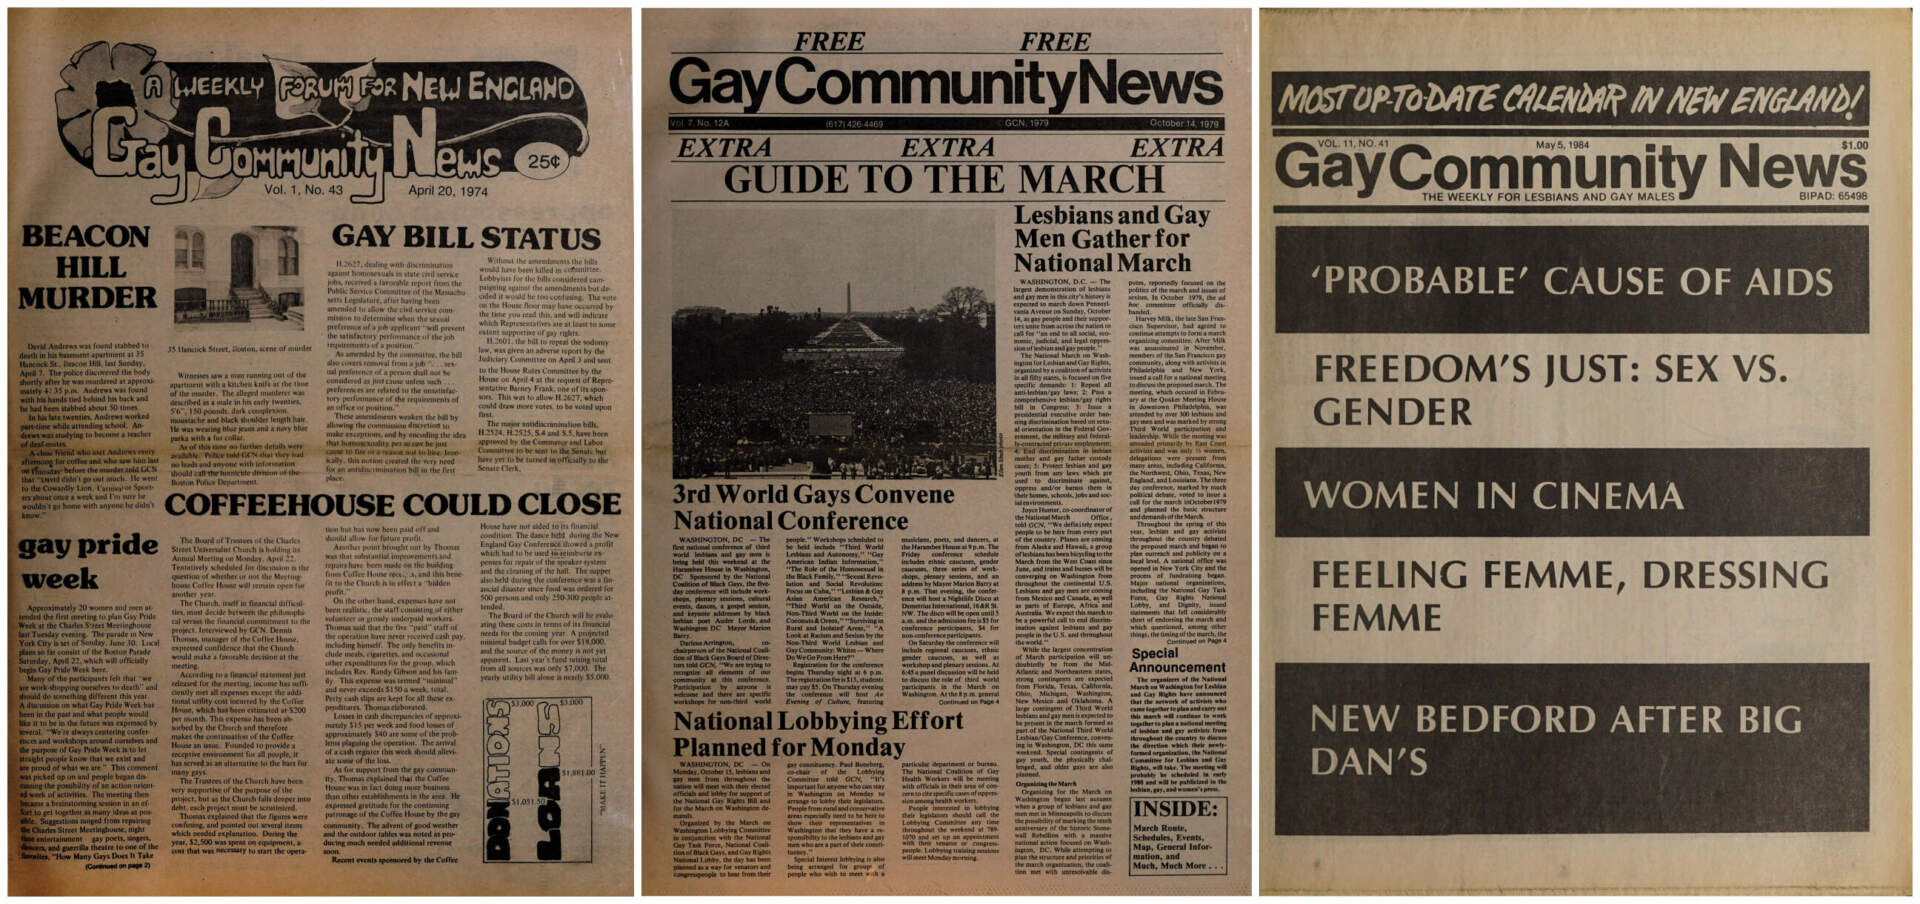 Covers of past issues of Gay Community News. (Courtesy Northeastern University Library | Archives and Special Collections)